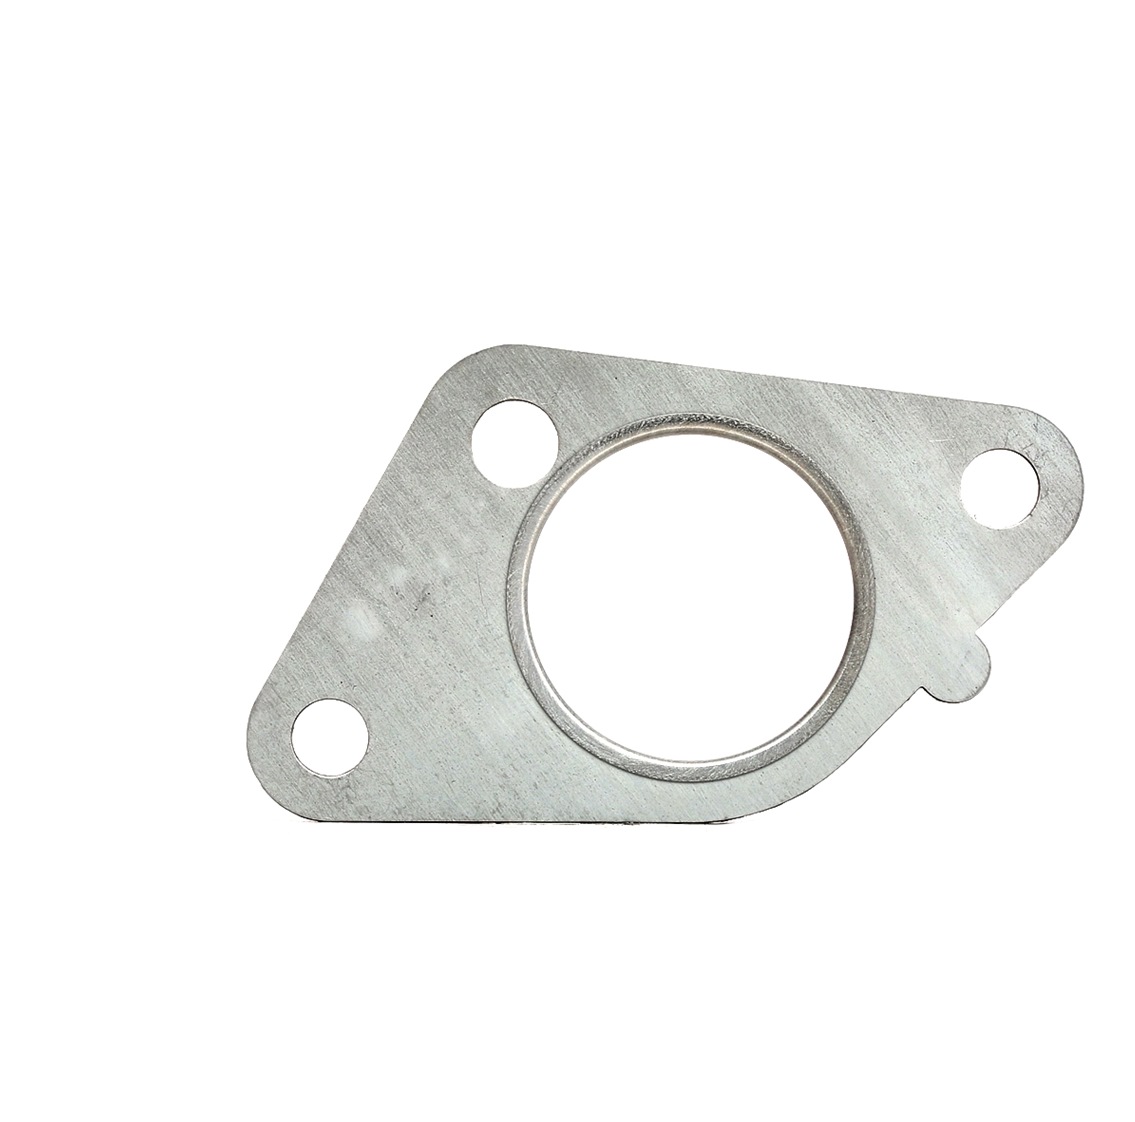 Exhaust manifold gasket ELRING 590.959 - Peugeot 305 Exhaust system spare parts order